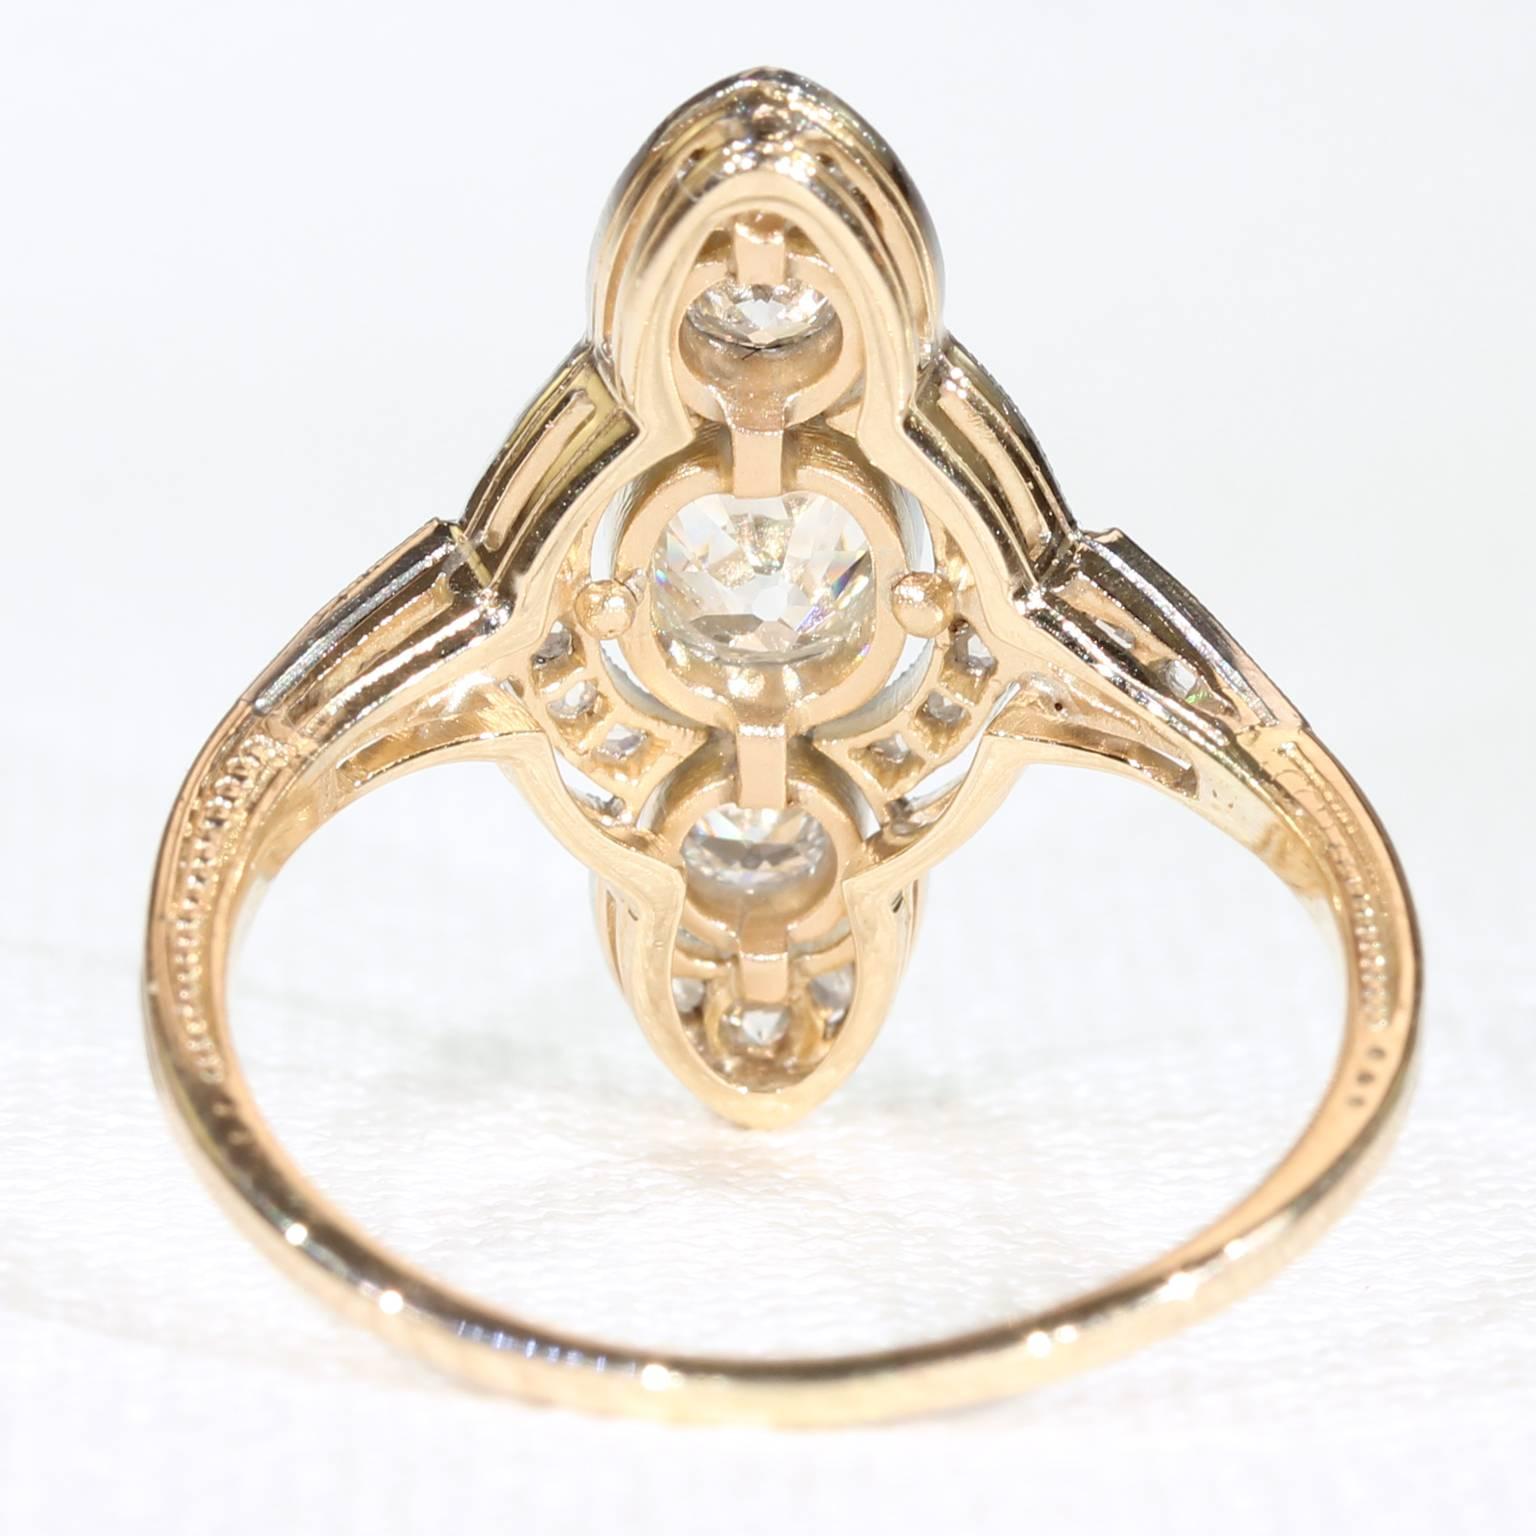 Edwardian Old European Cut Diamond Engagement Ring In Excellent Condition For Sale In Middleton, WI